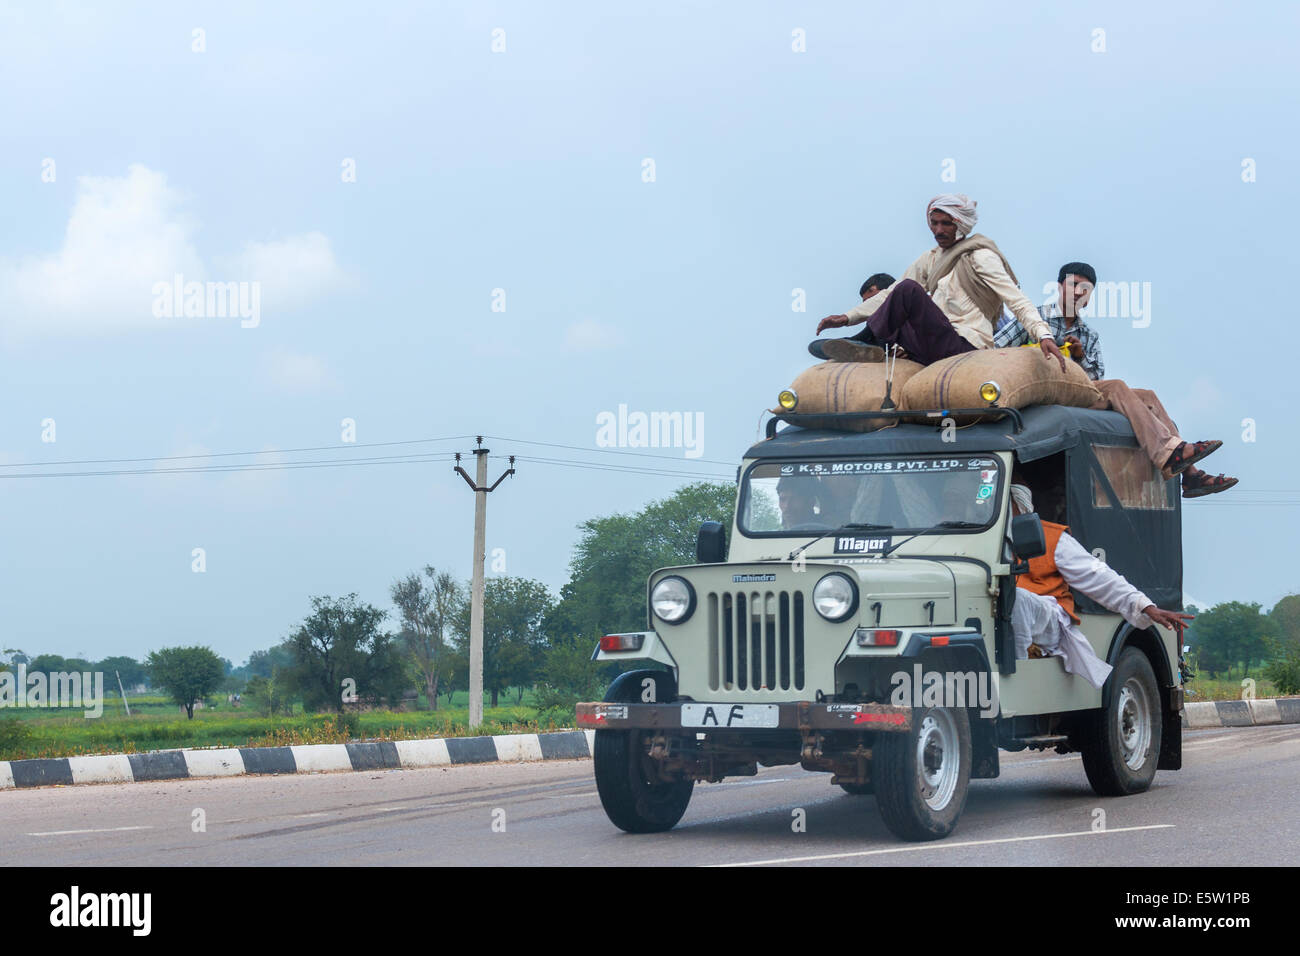 Overloaded jeep with bags and people on the roof driving on the road. Stock Photo